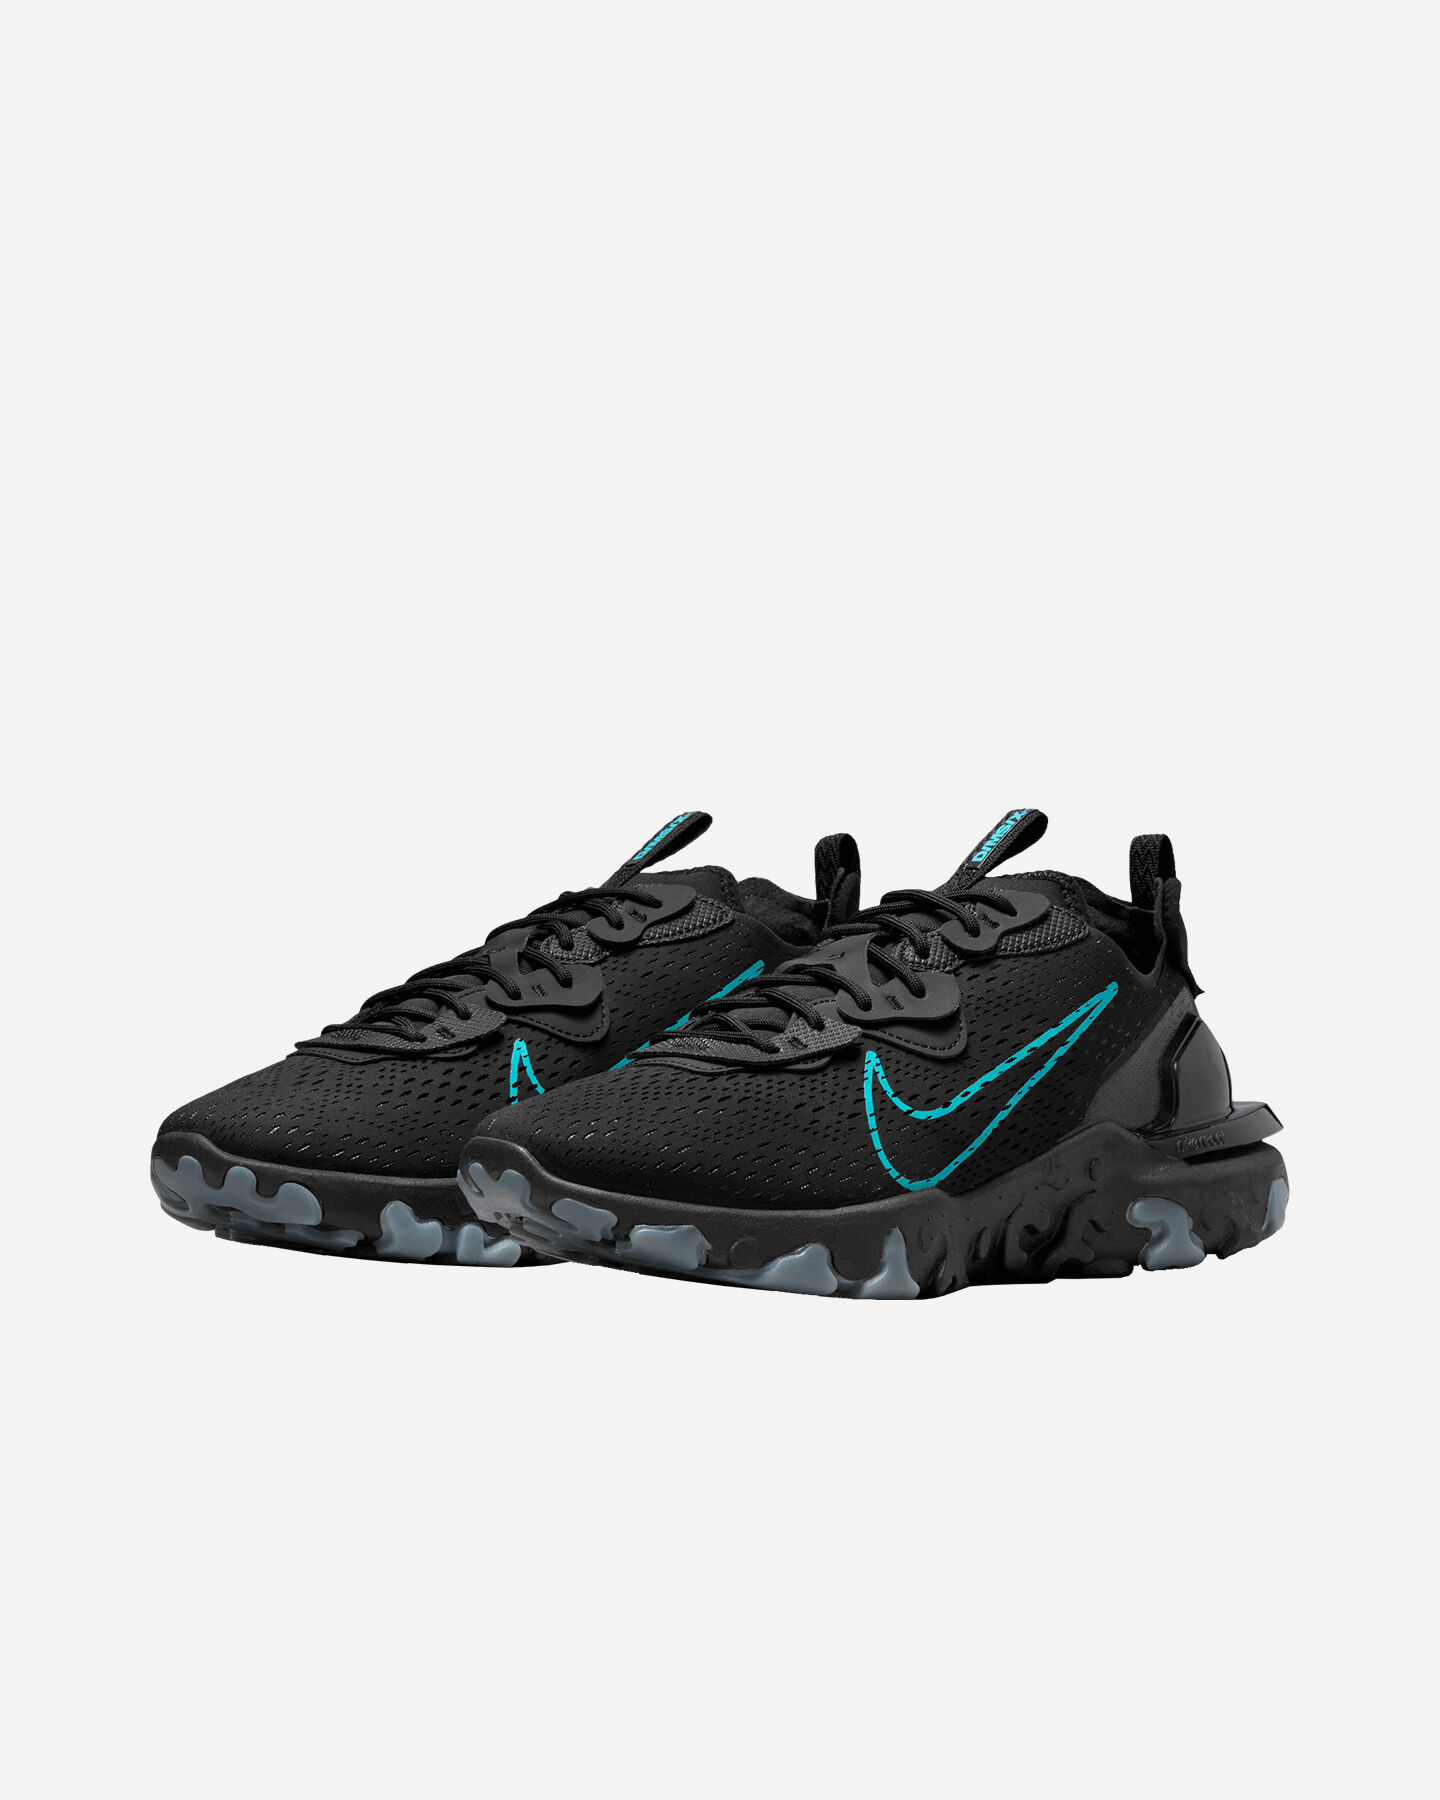  Scarpe sneakers NIKE REACT VISION M S5660704|001|7 scatto 1